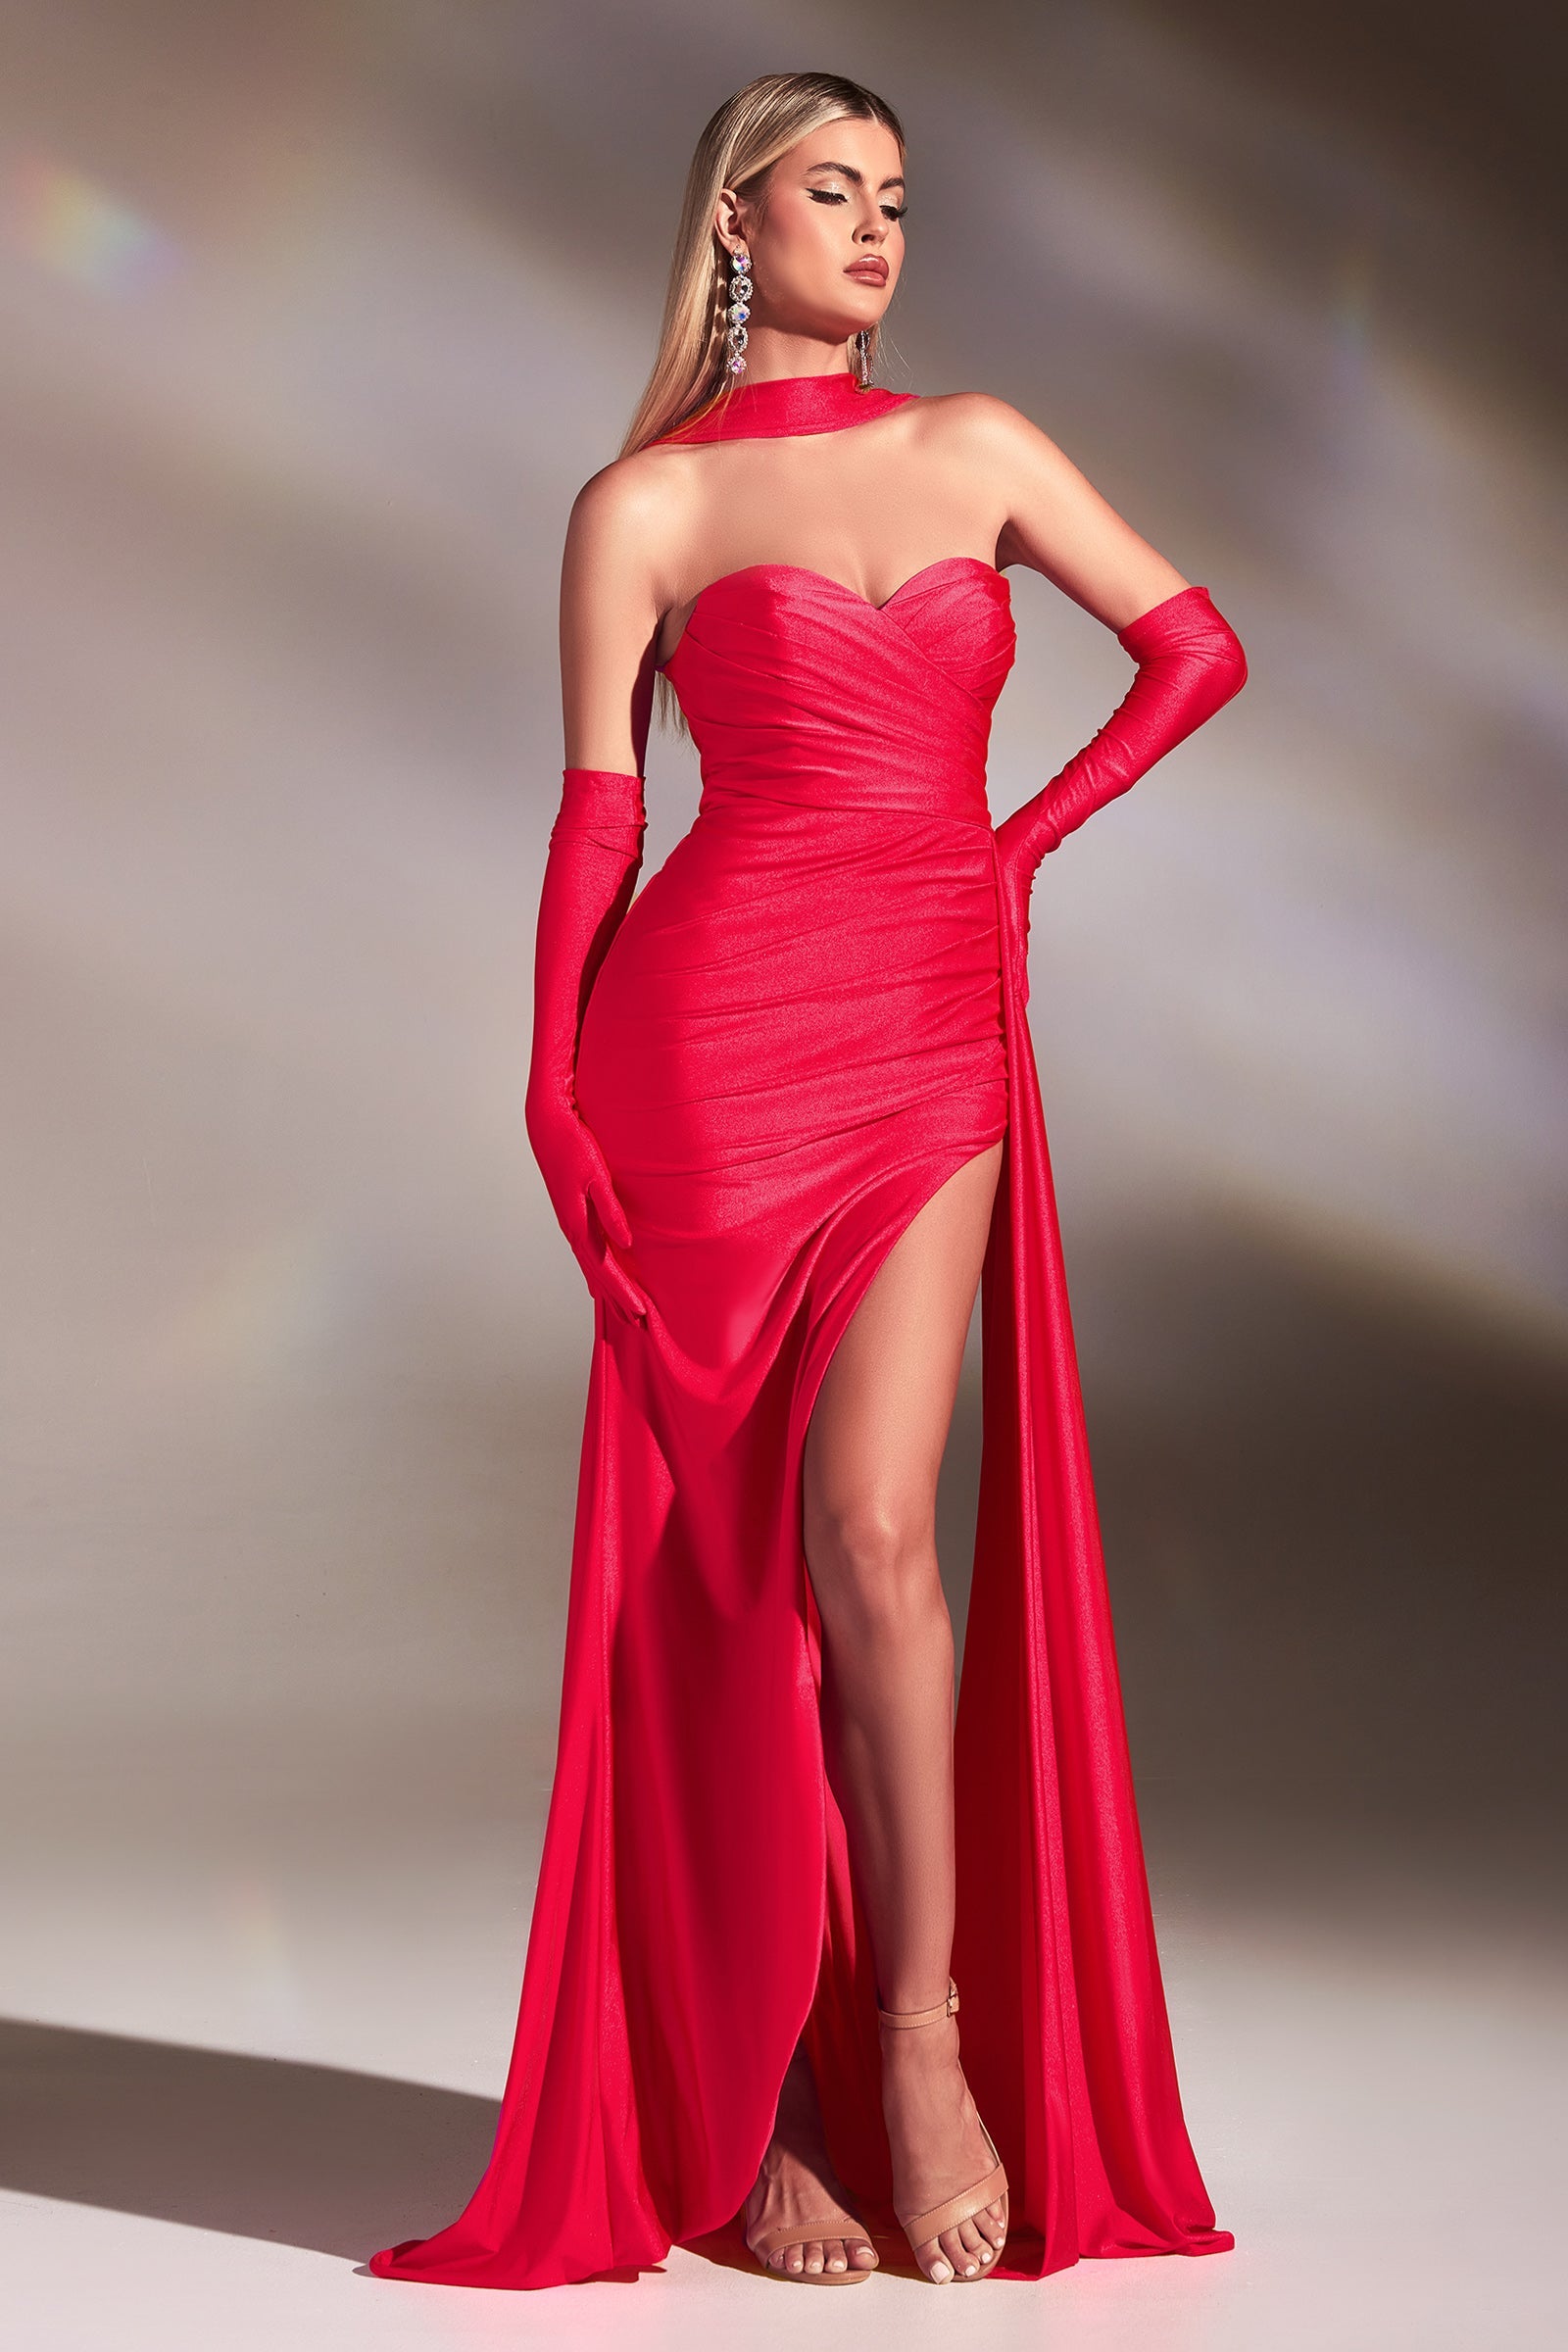 Strapless Luxe Stretch Satin Dress with Sash Gloves Satin Bridesmaid Dresses Corset Prom Dress UME London UK Red Hot Coral